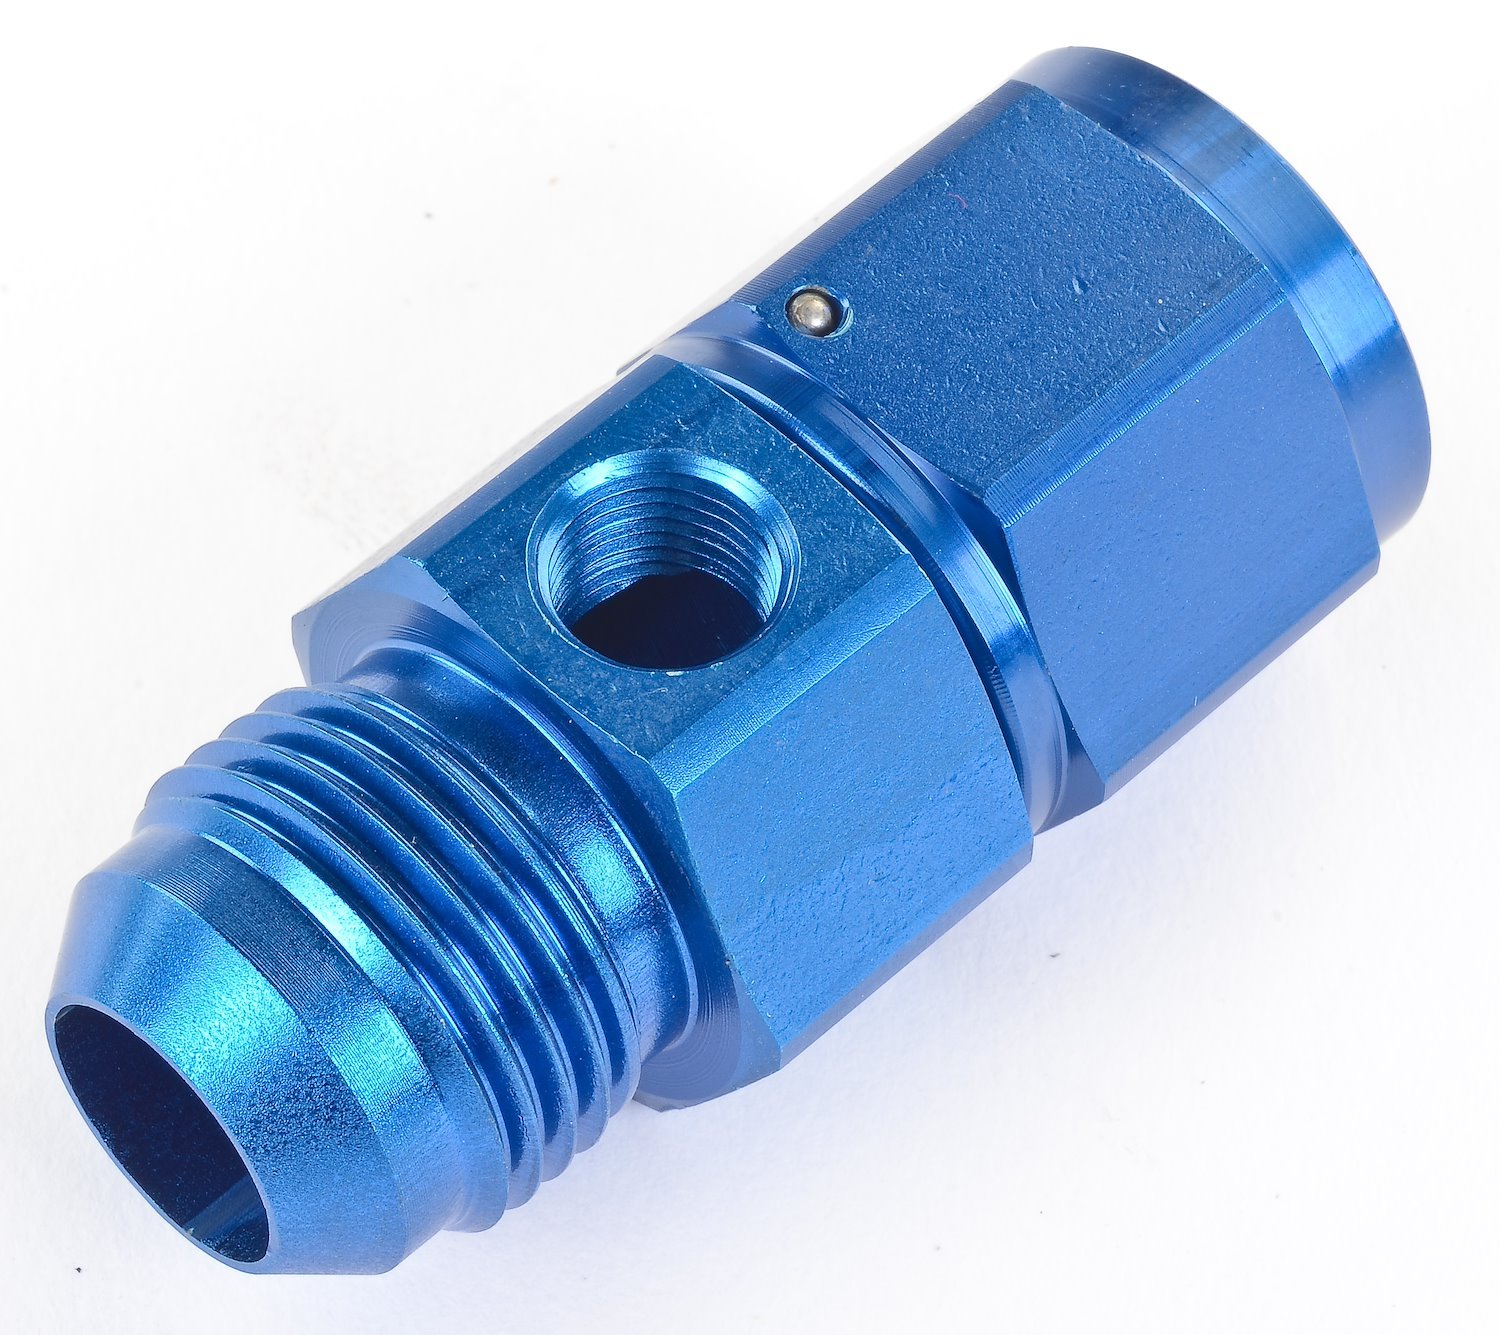 Fuel Pressure Adapter Fitting -10AN Male/Female x 1/8" NPT